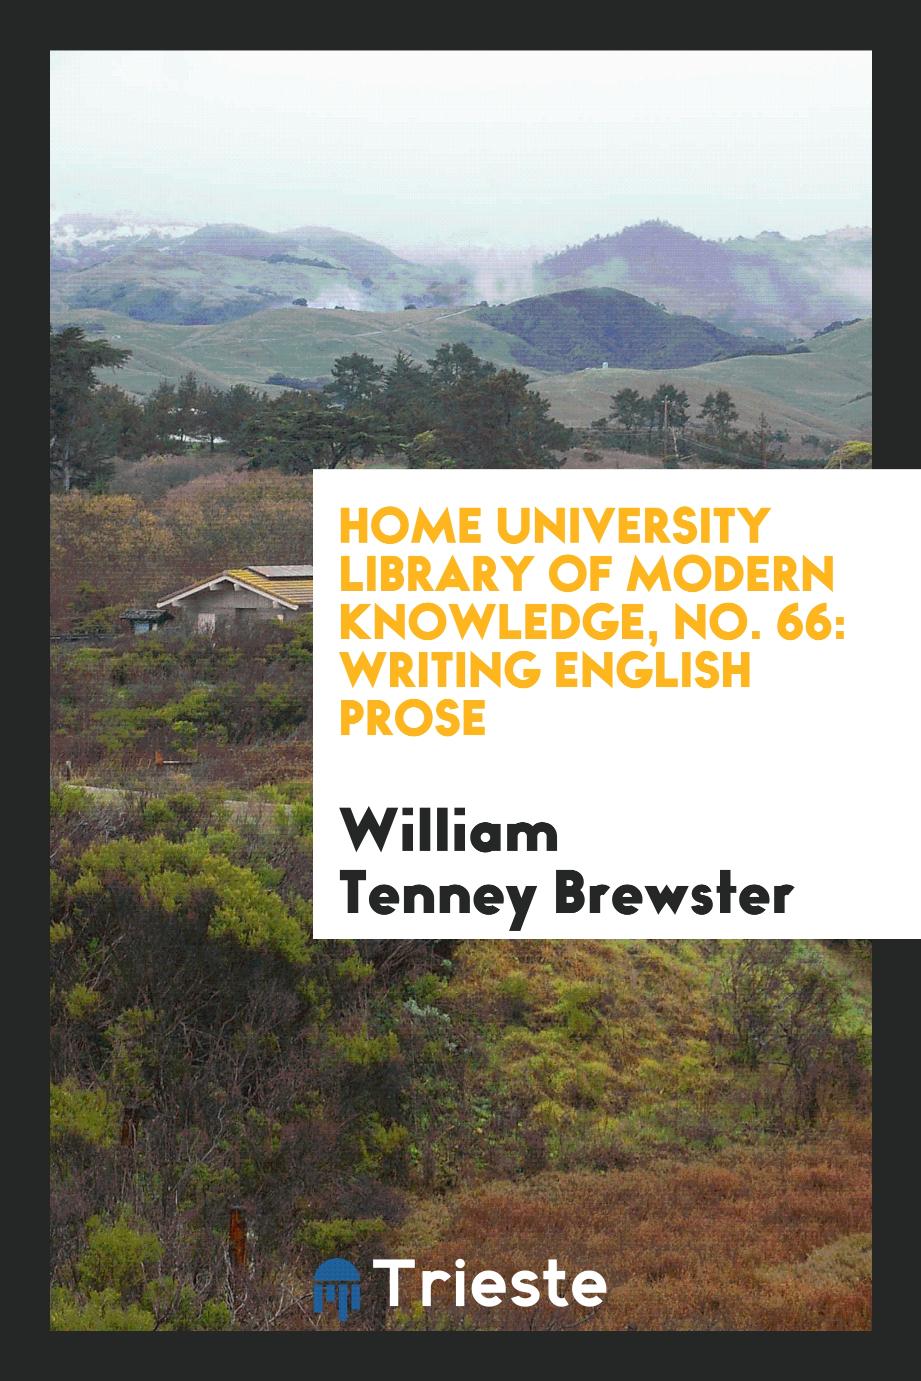 Home University Library of Modern Knowledge, No. 66: Writing English prose